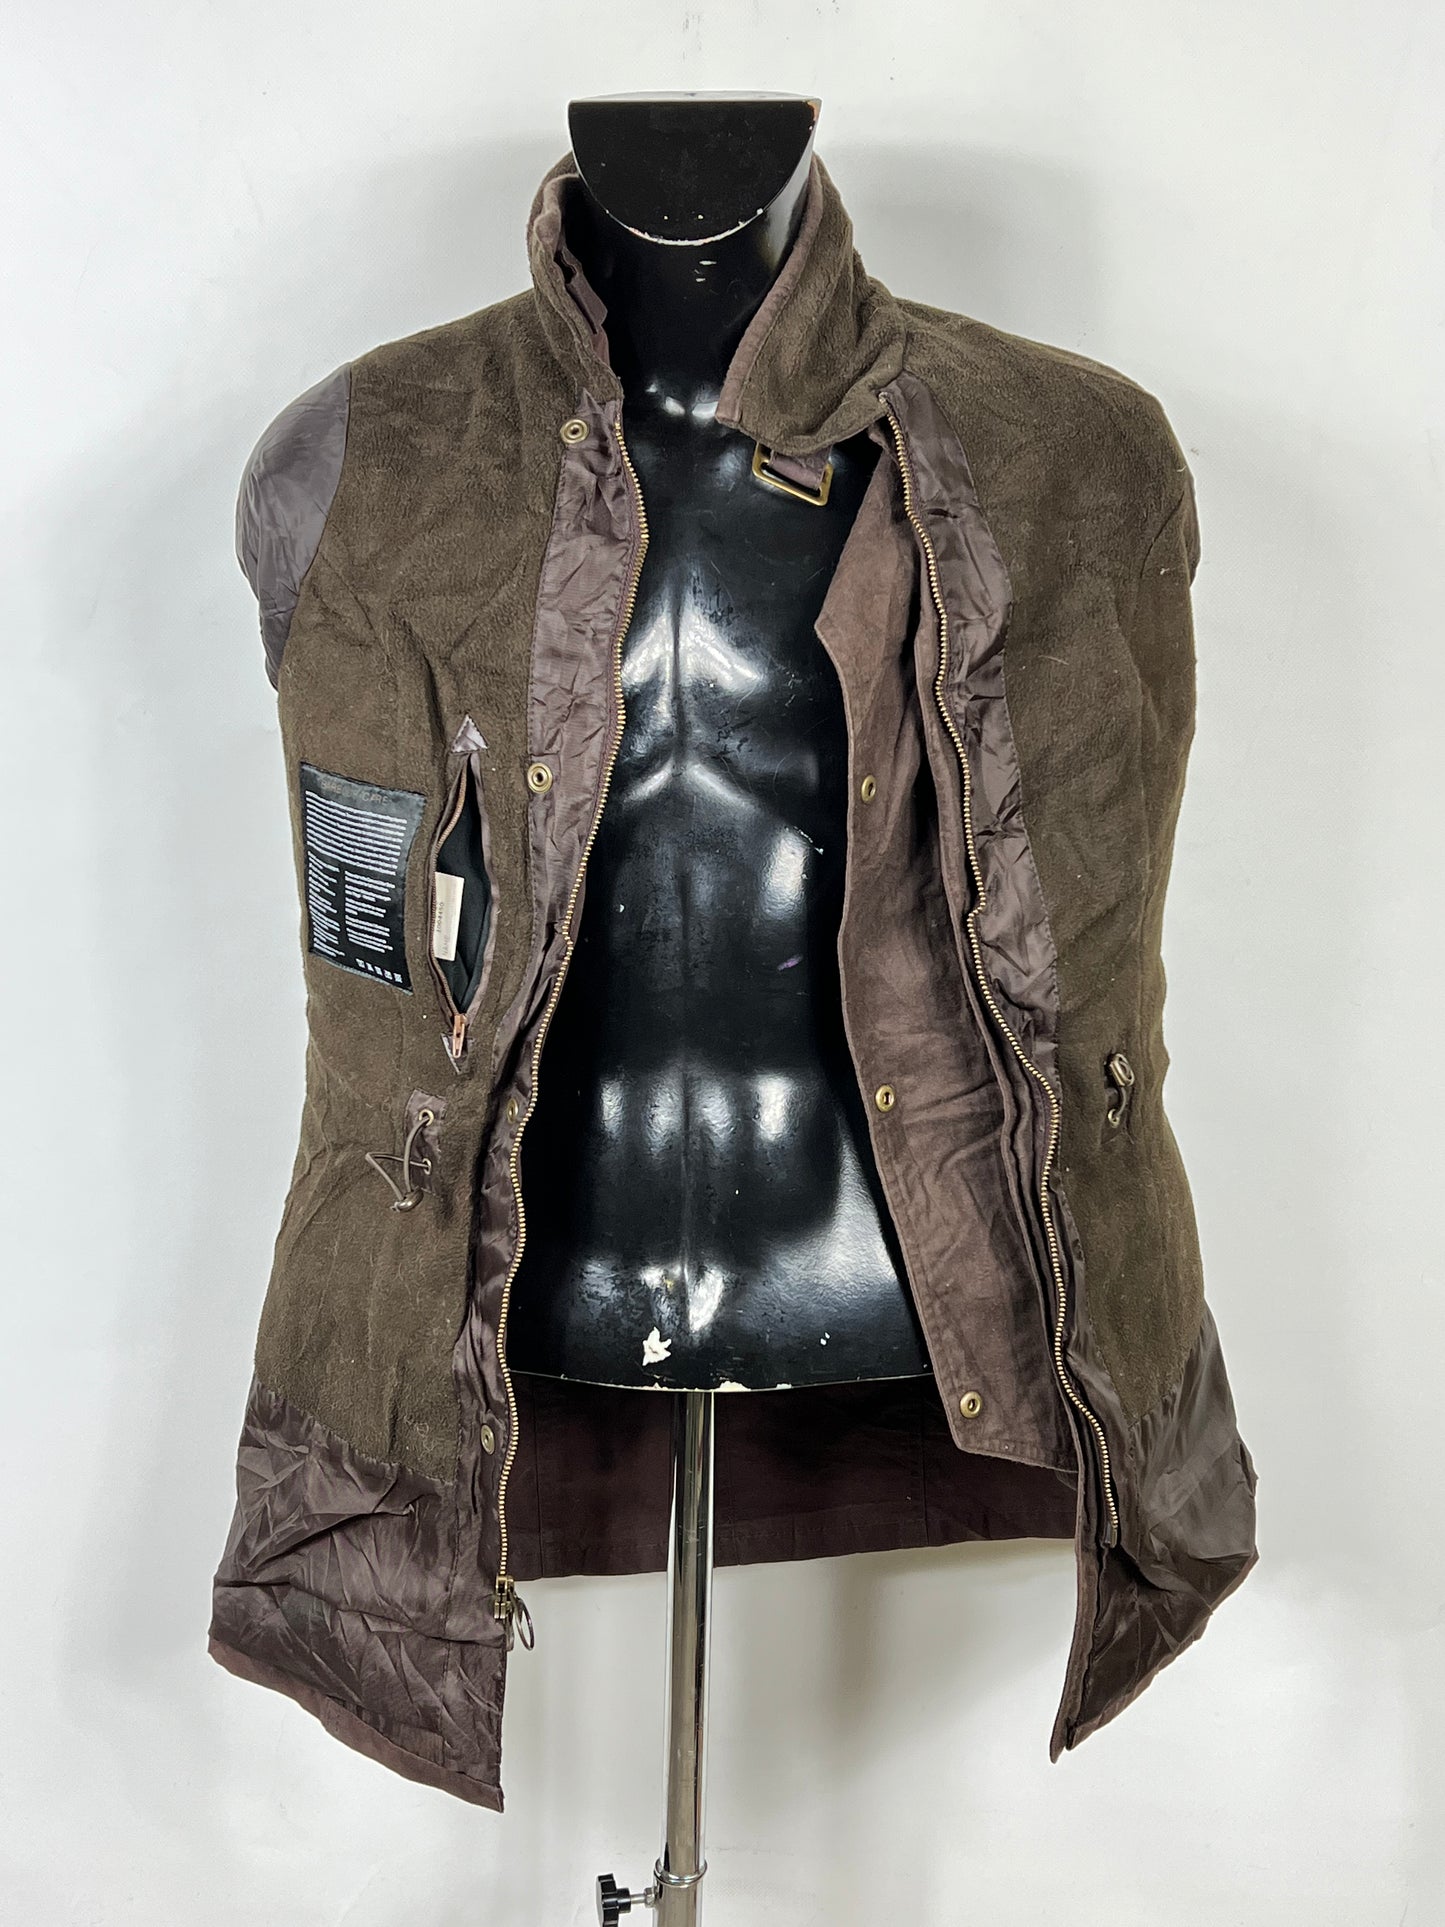 Giacca Barbour Donna Marrone cerata Small UK10 International Brown Wax Lady Jacket